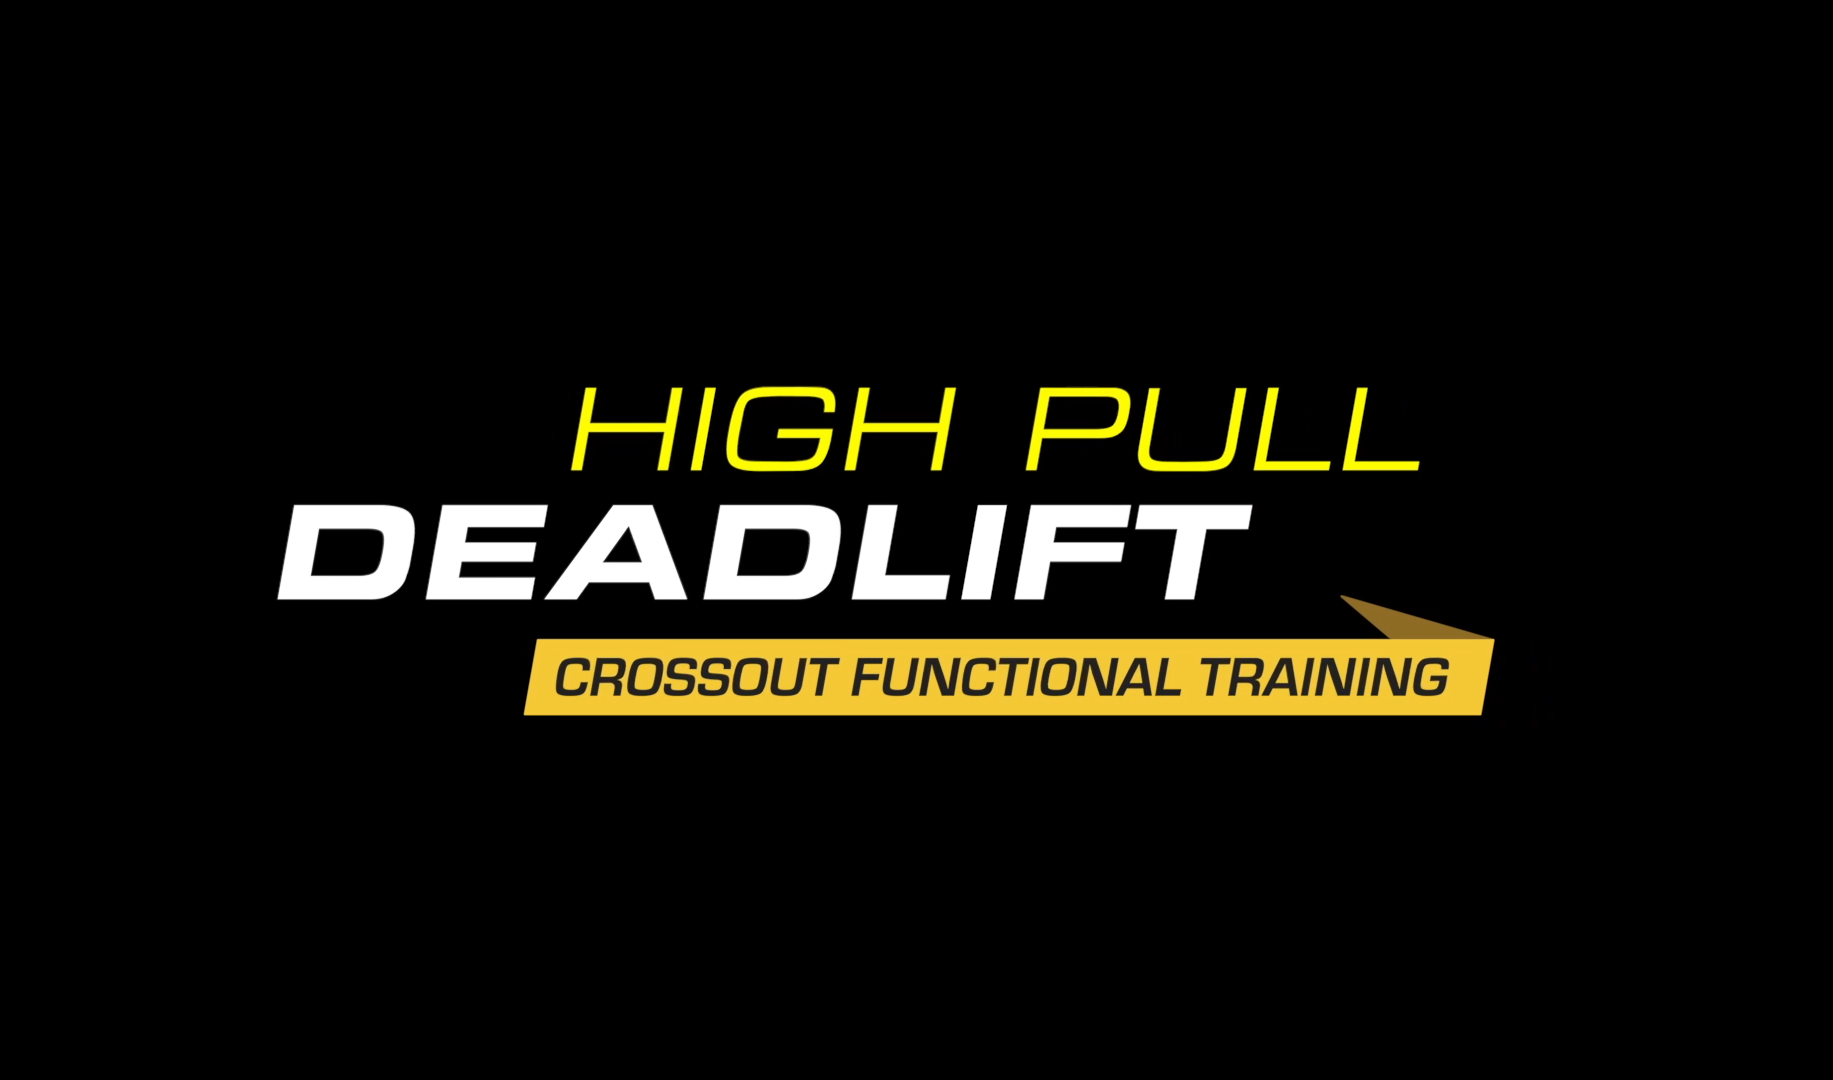 High Pull Deadlift Crossout Functional Training